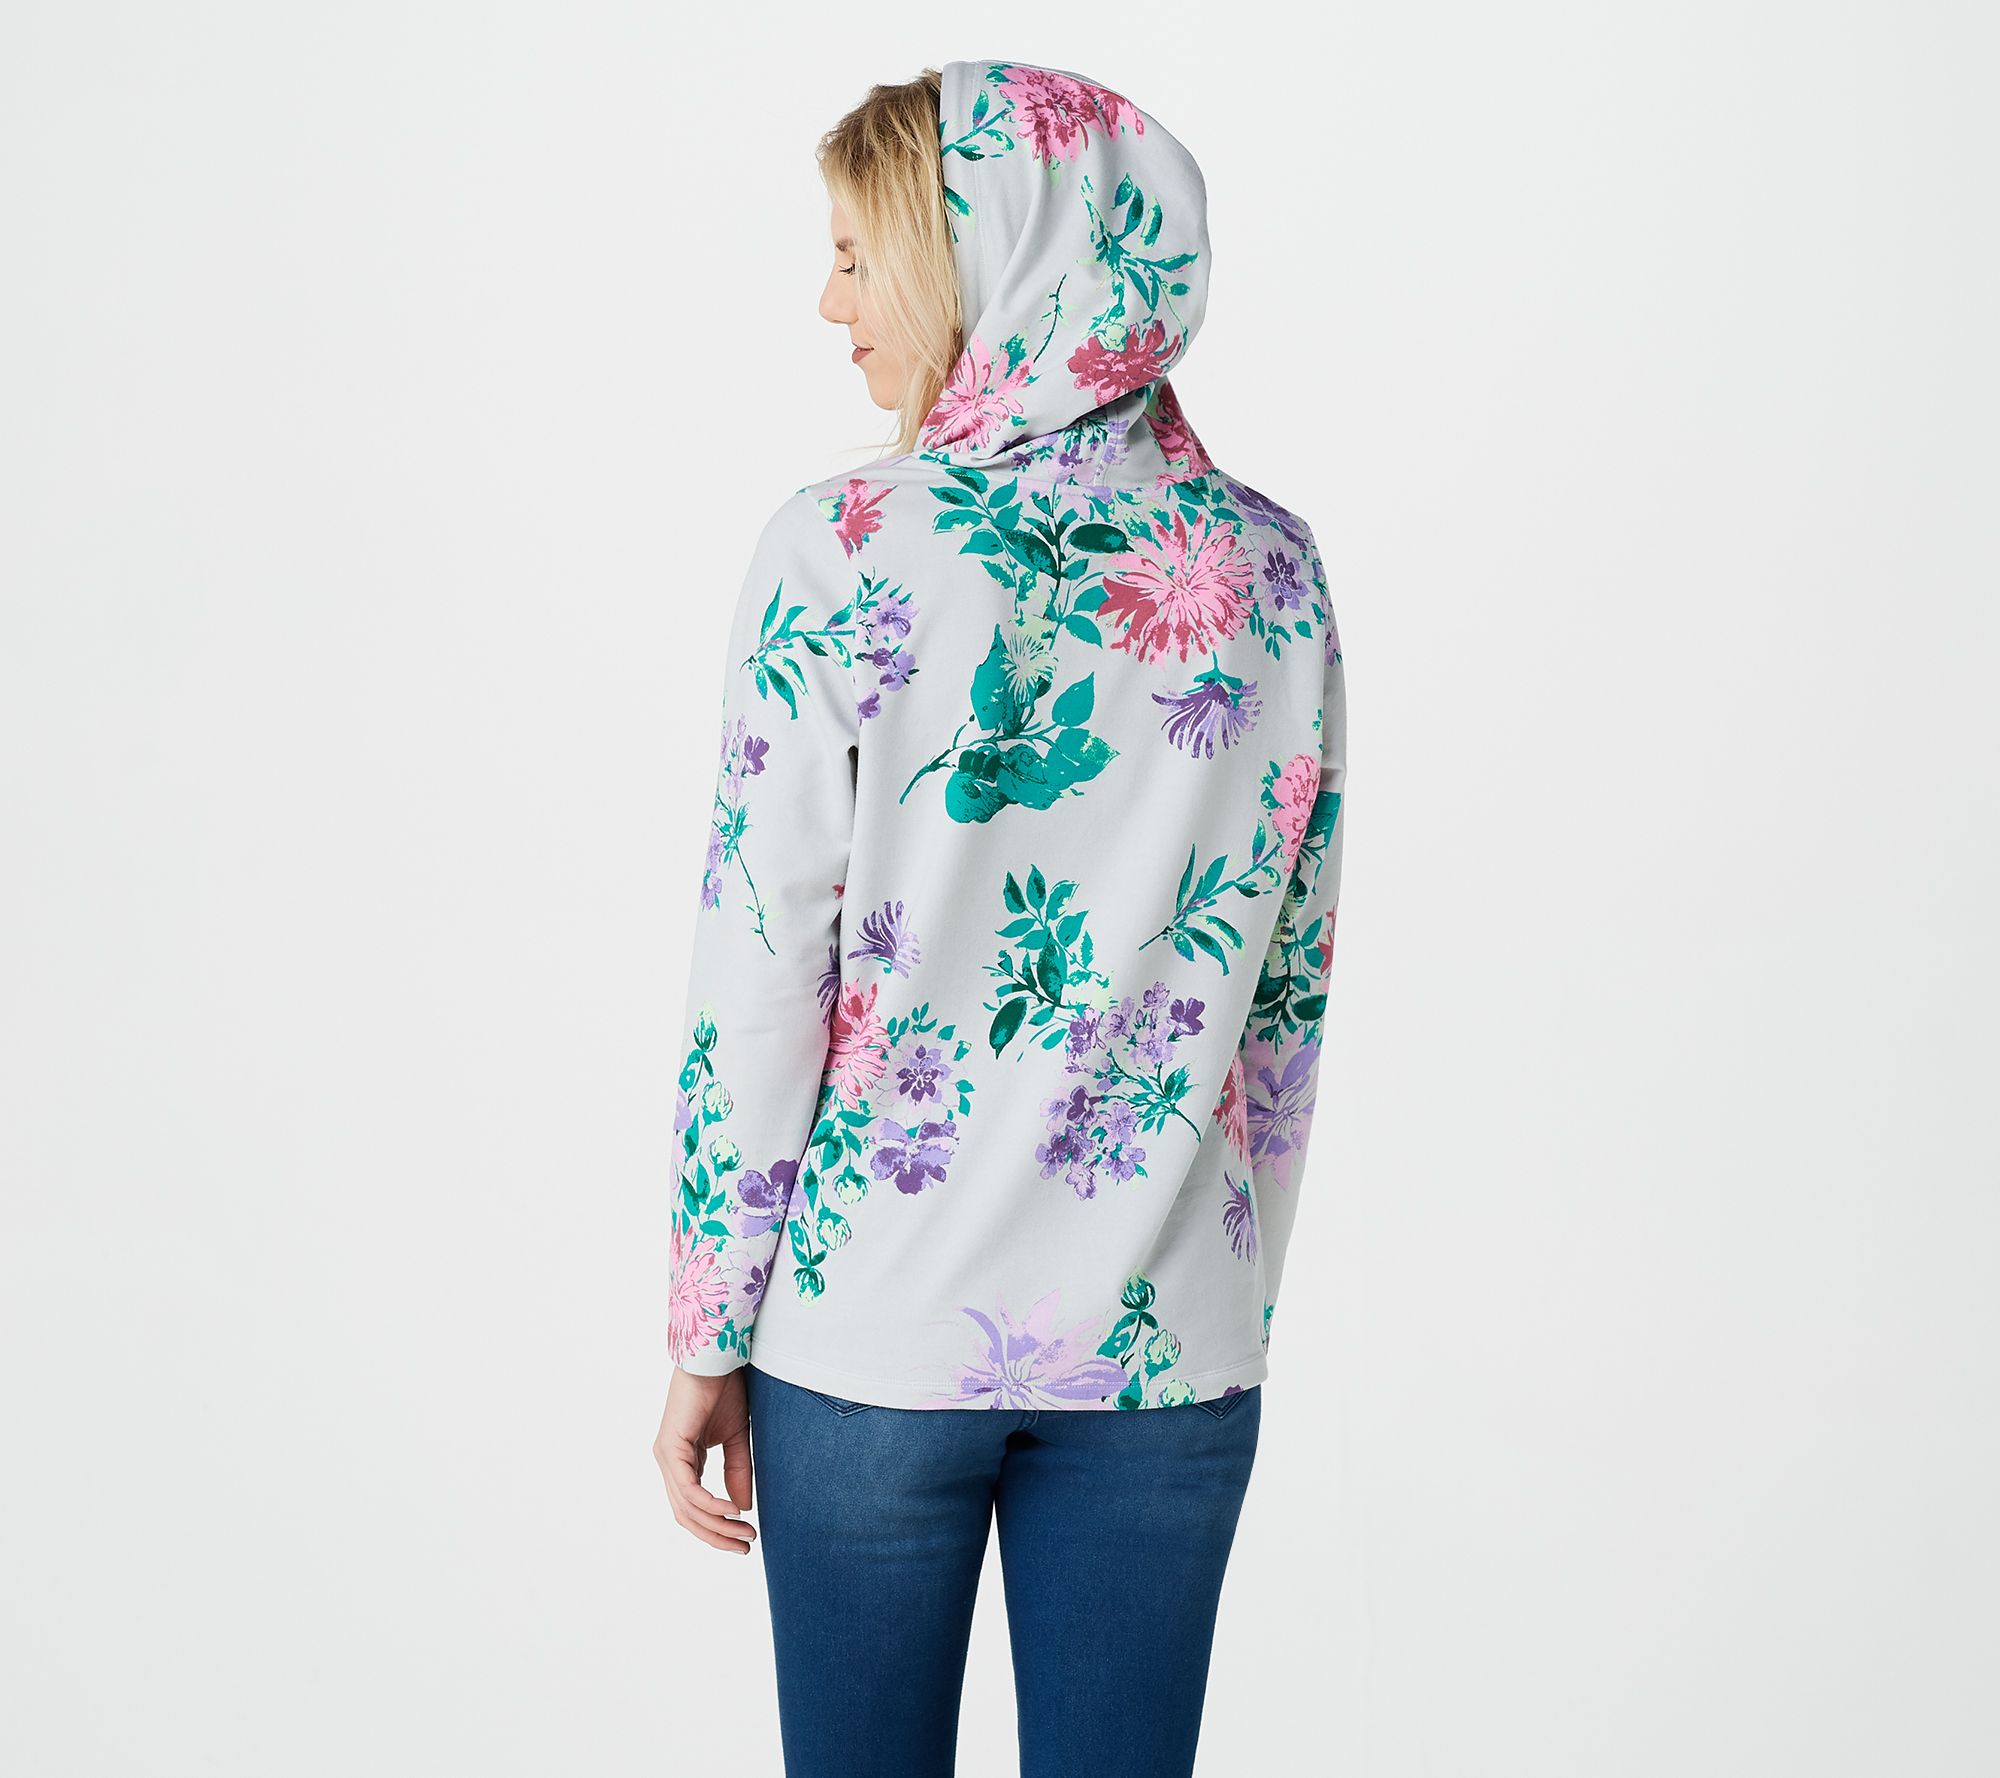 Denim & Co. Active Printed French Terry Hooded Sweatshirt - QVC.com